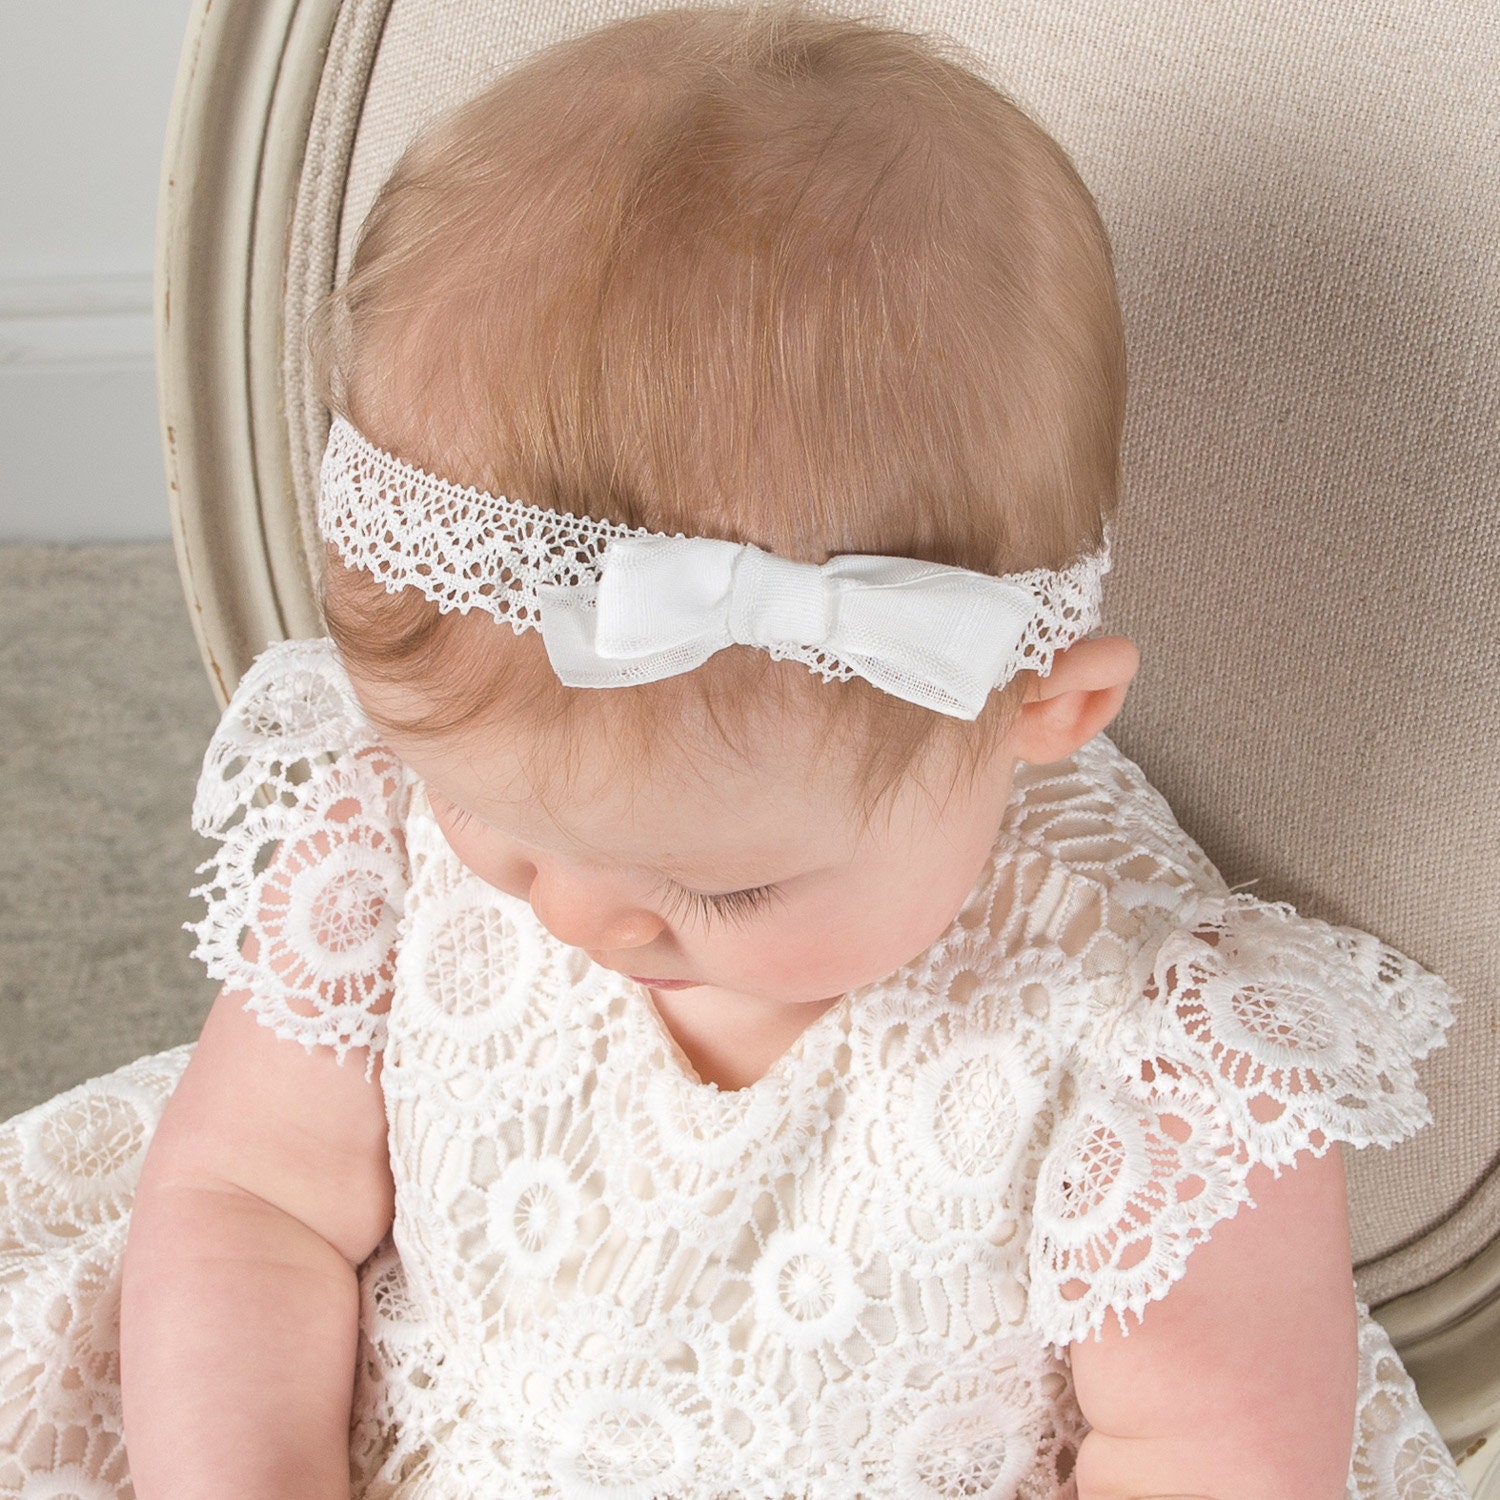 Limited Time DEAL Lace Headbands Set of 20 One of Each Color  Interchangeable Headbands Baby Headbands Wholesale Headbands -  Canada